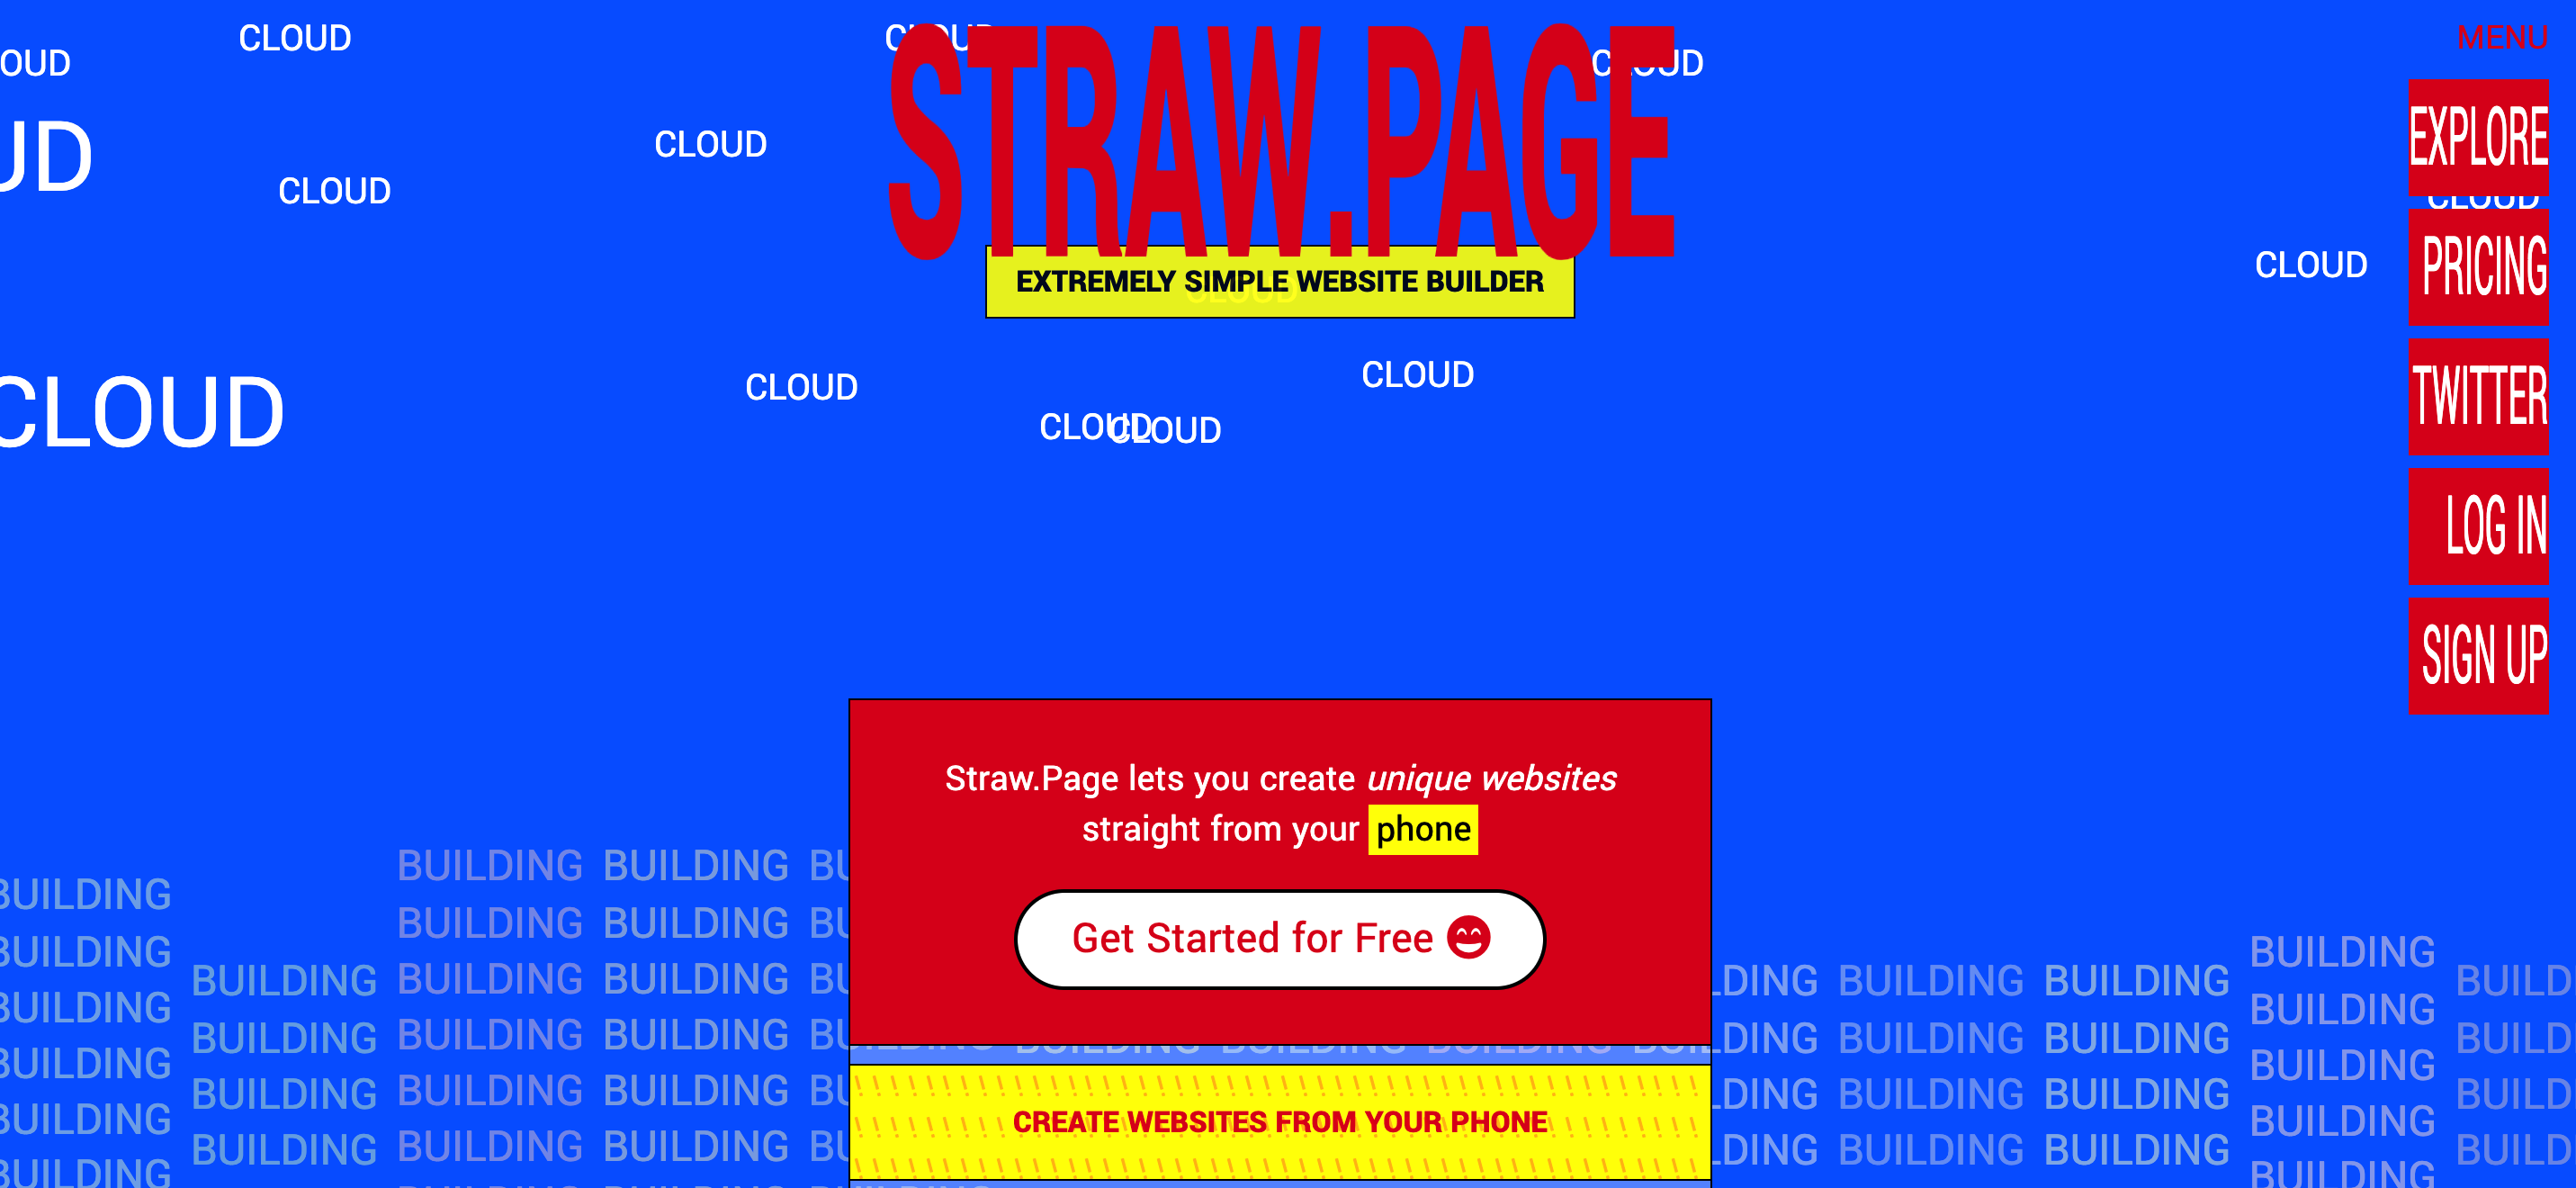 Straw.Page